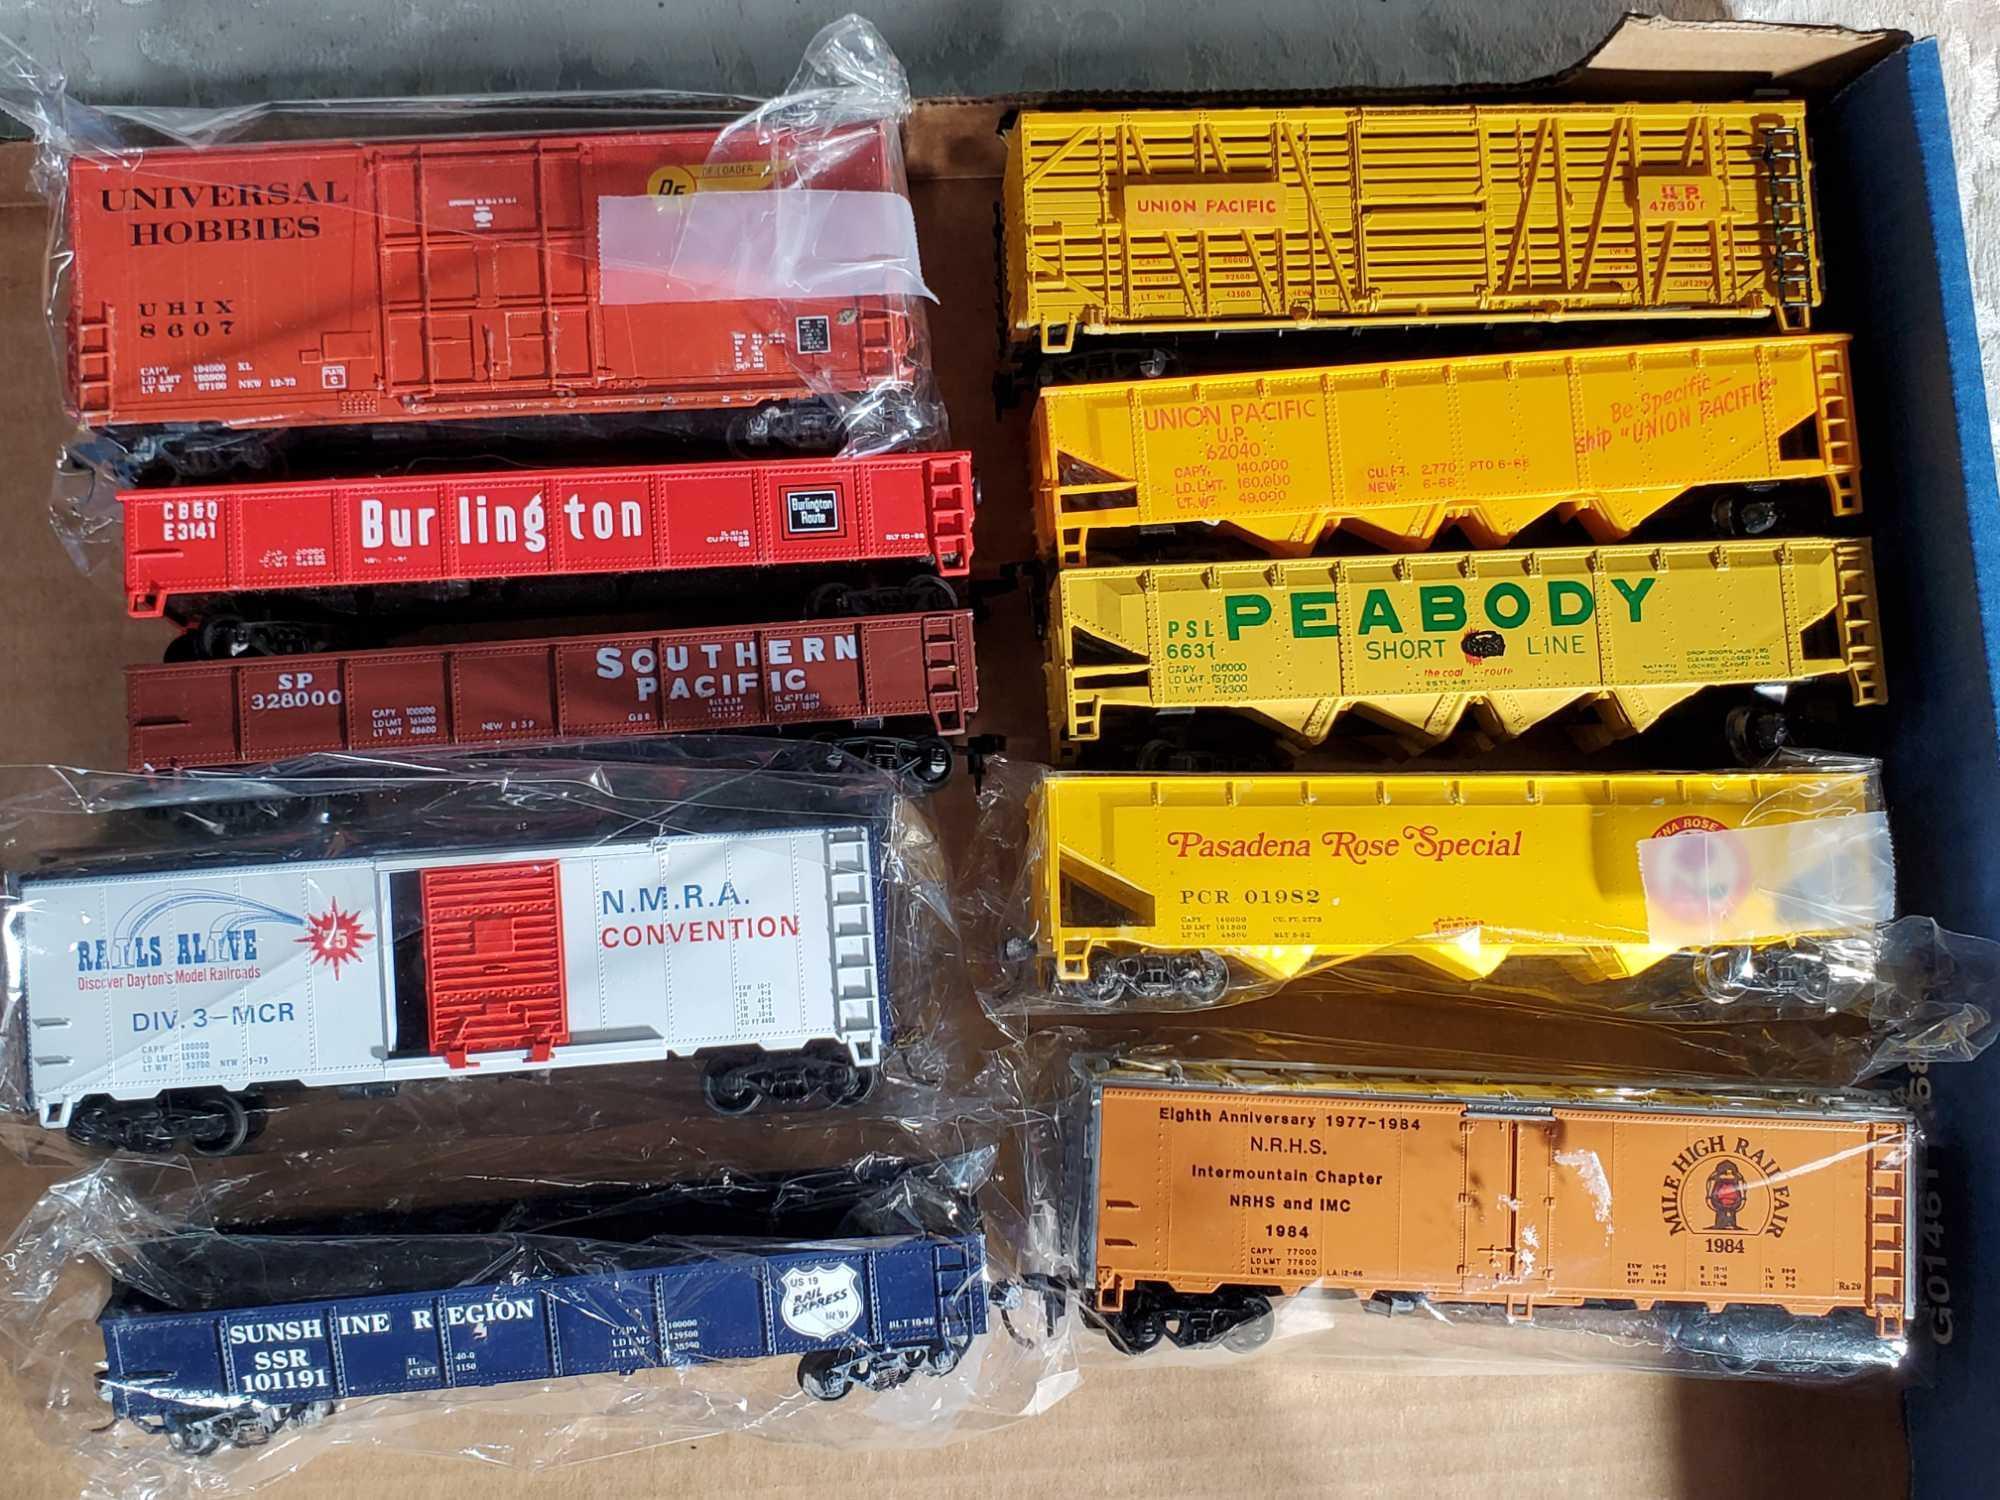 2 Flats of Vintage HO Train Cars and Accessories